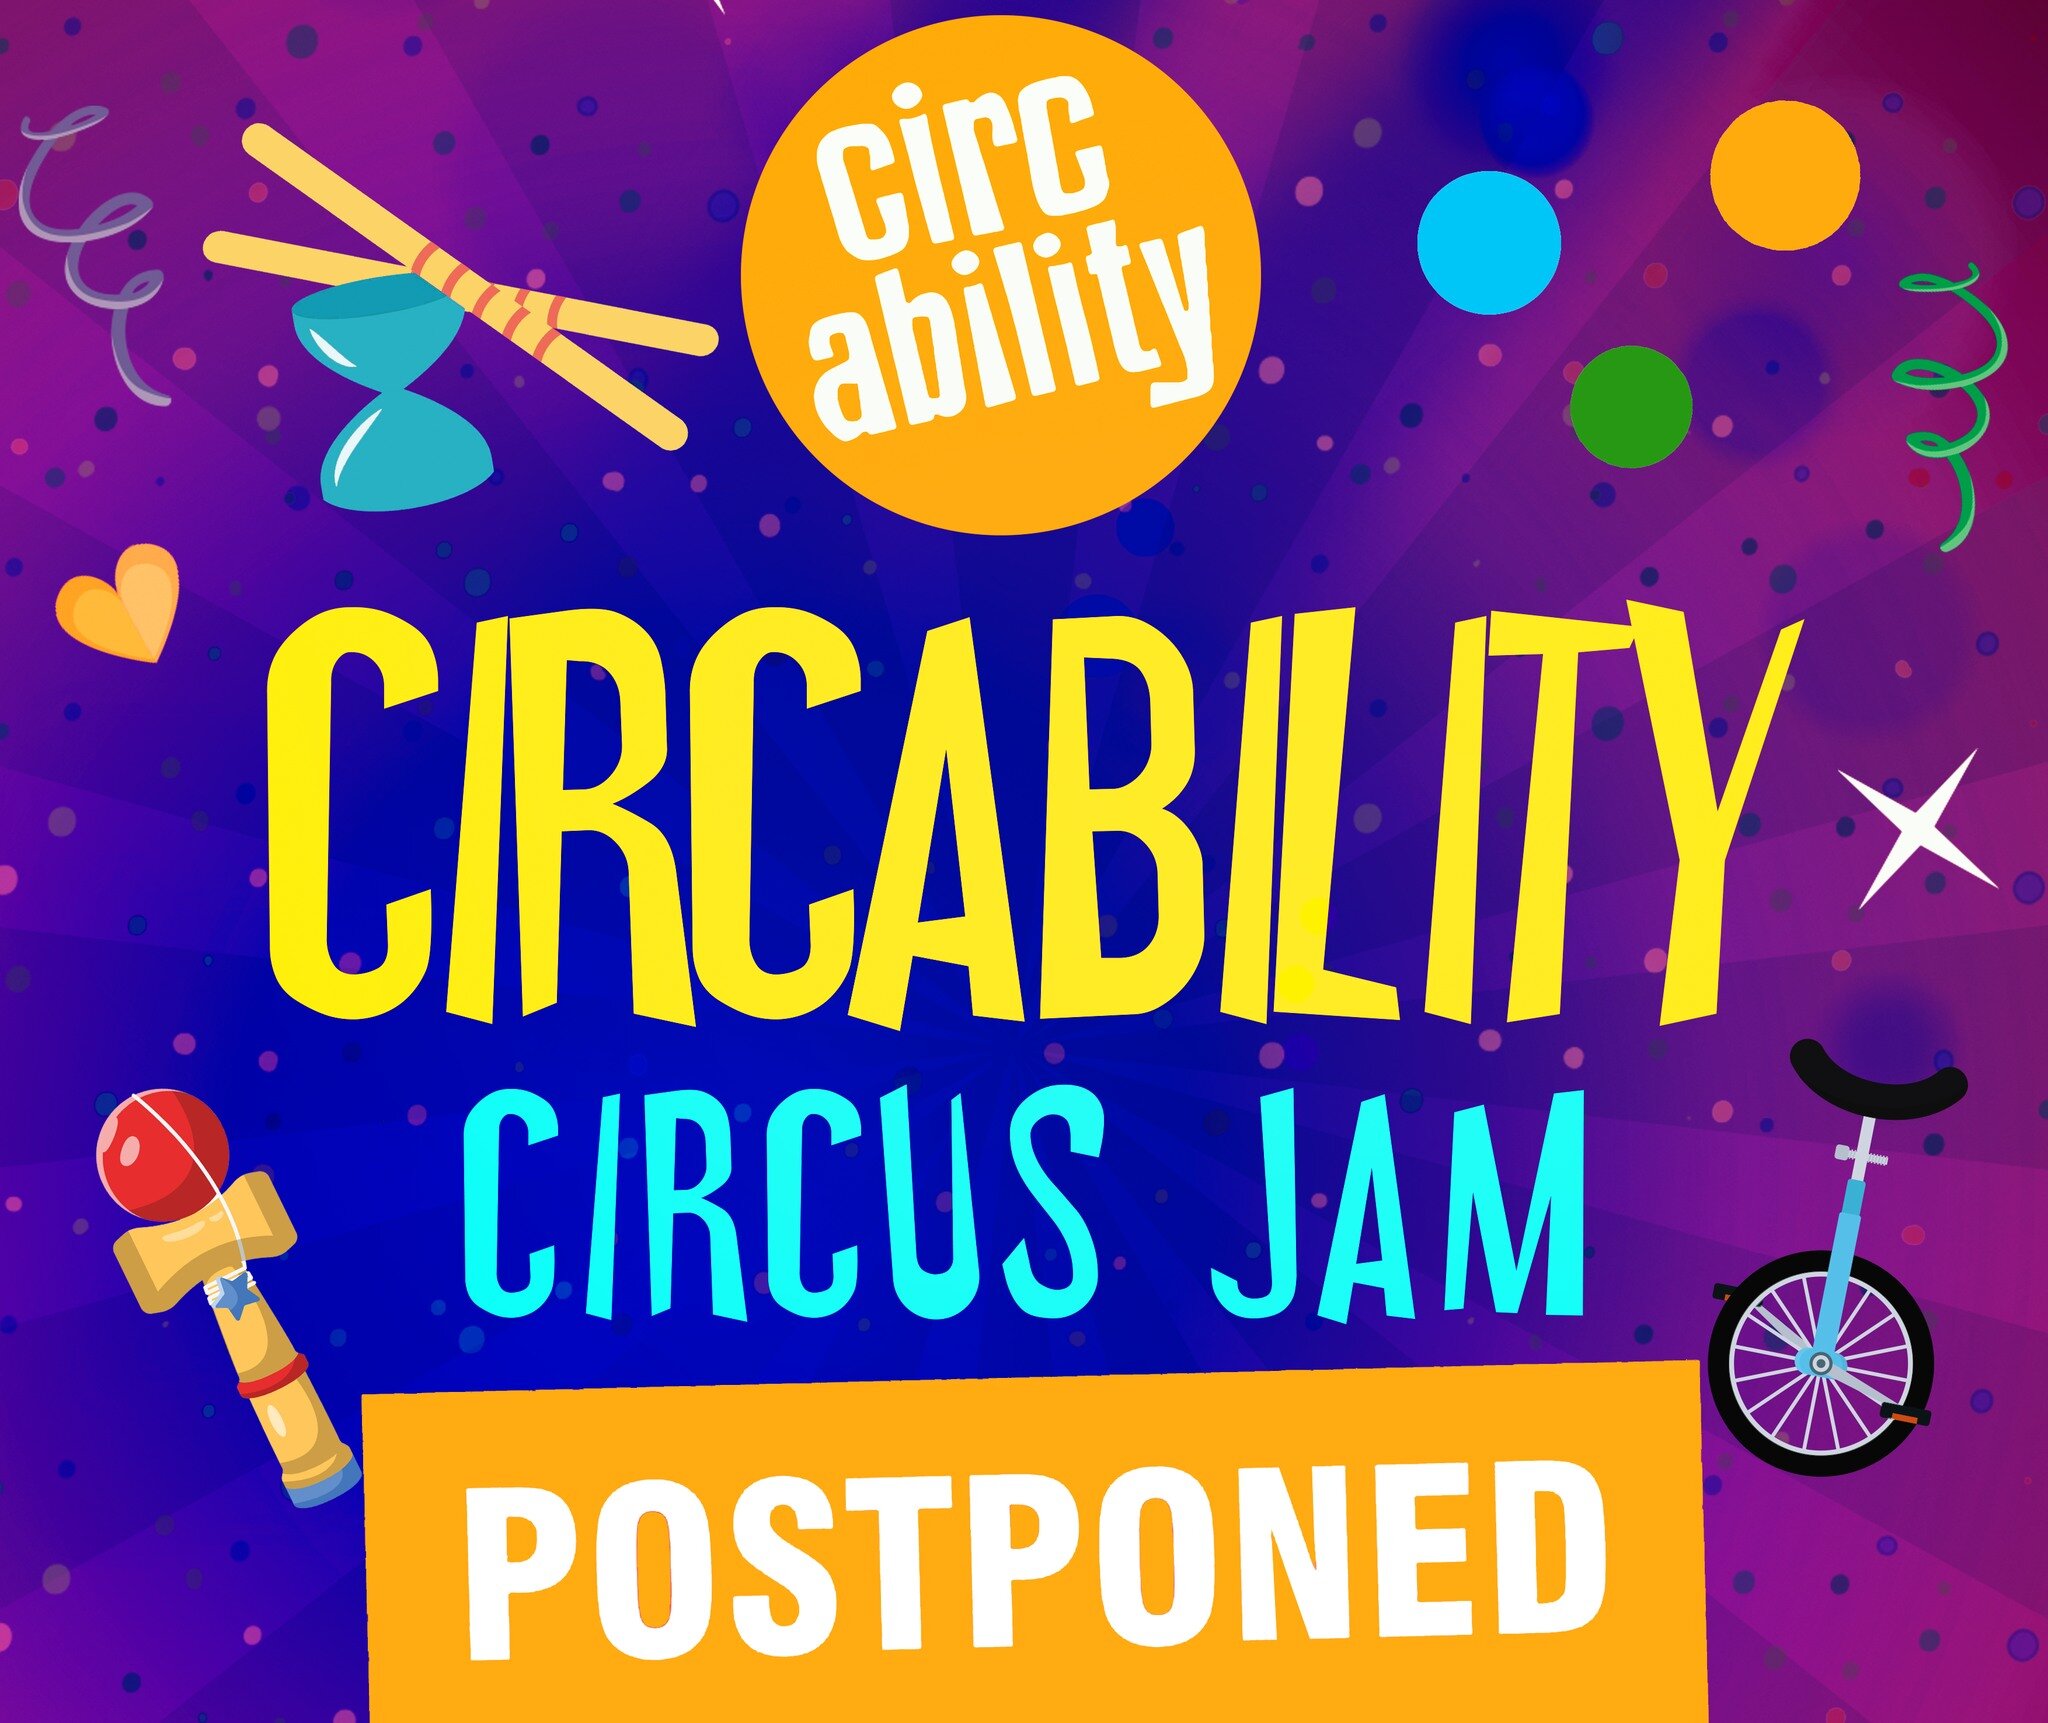 Unfortunately we've had to postpone this week's #CircusJam. The good news is that we we'll be back same time, same place next week! (Wednesday 6-8PM at Circability Central)

We look forward to seeing you then, and appreciate your patience!